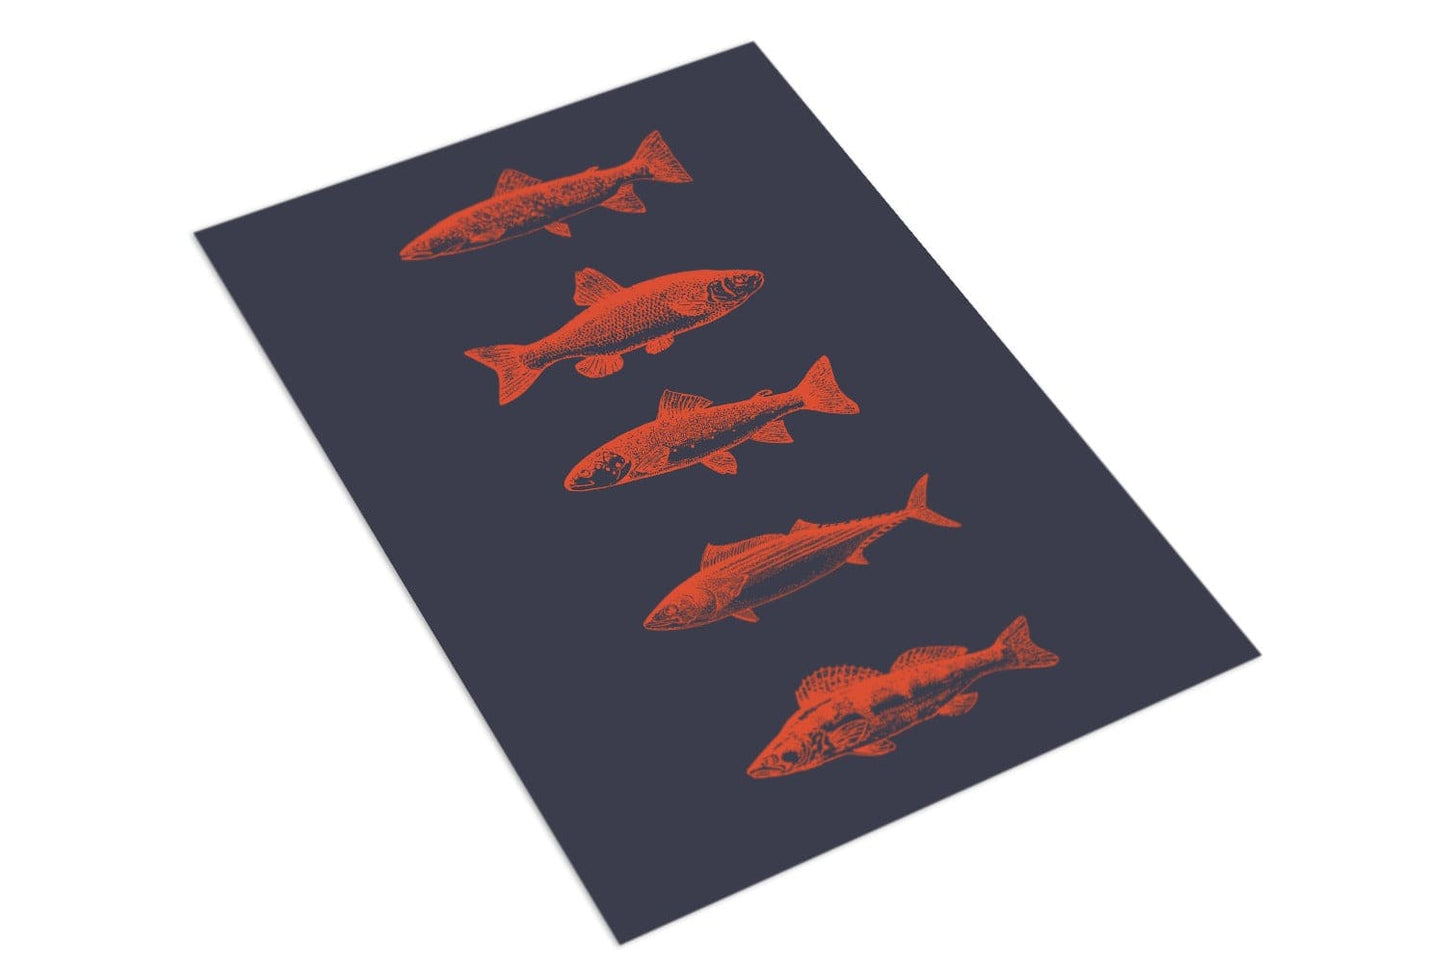 Five Fish - The Paper People Greeting Cards